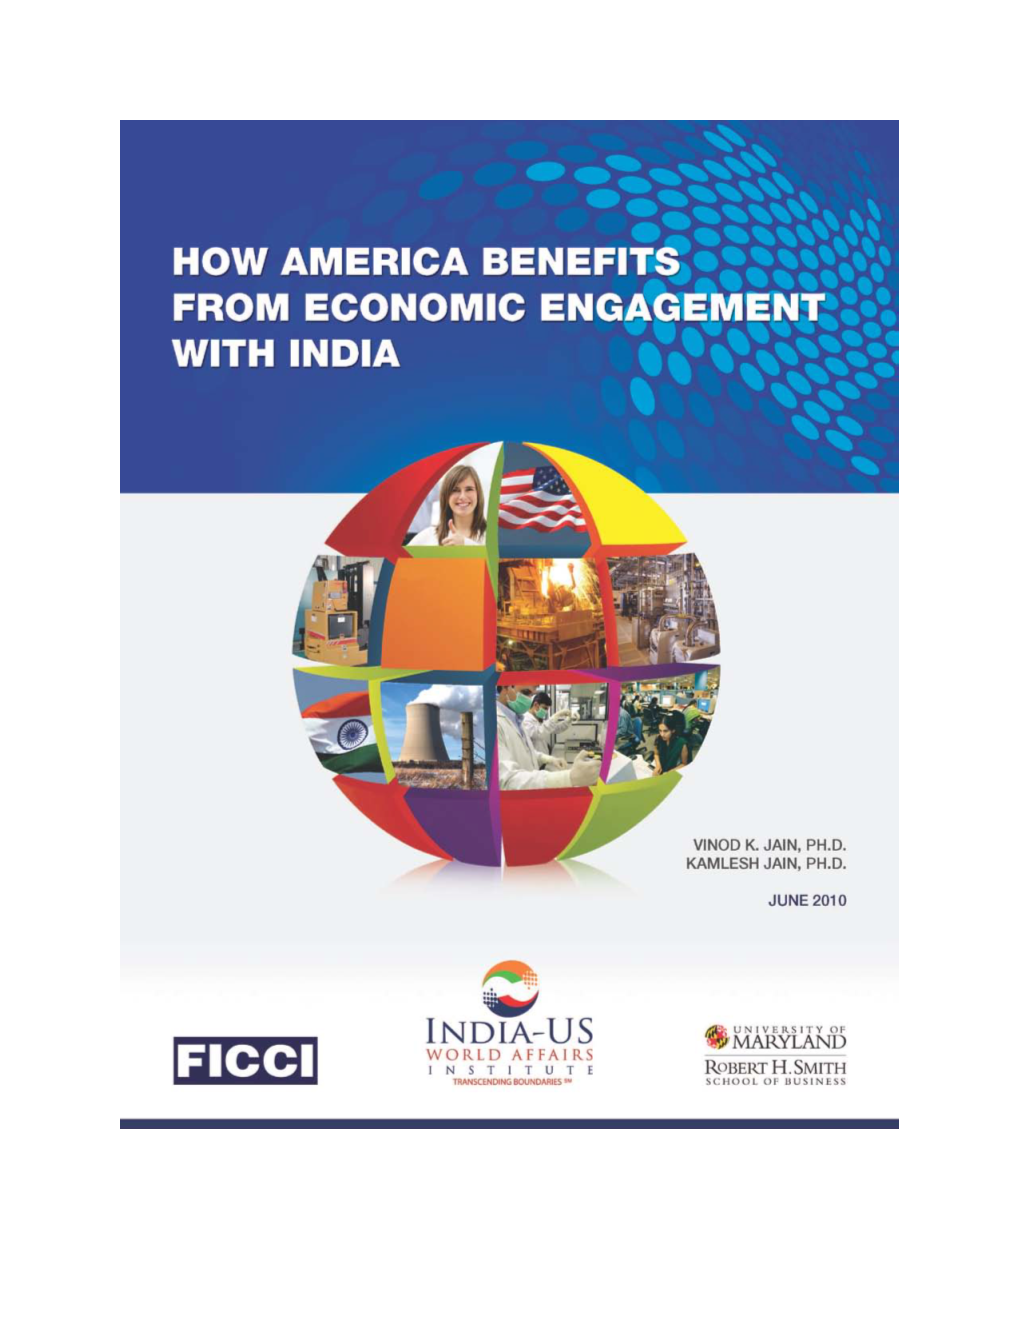 Impact of Indian Investments in the U.S